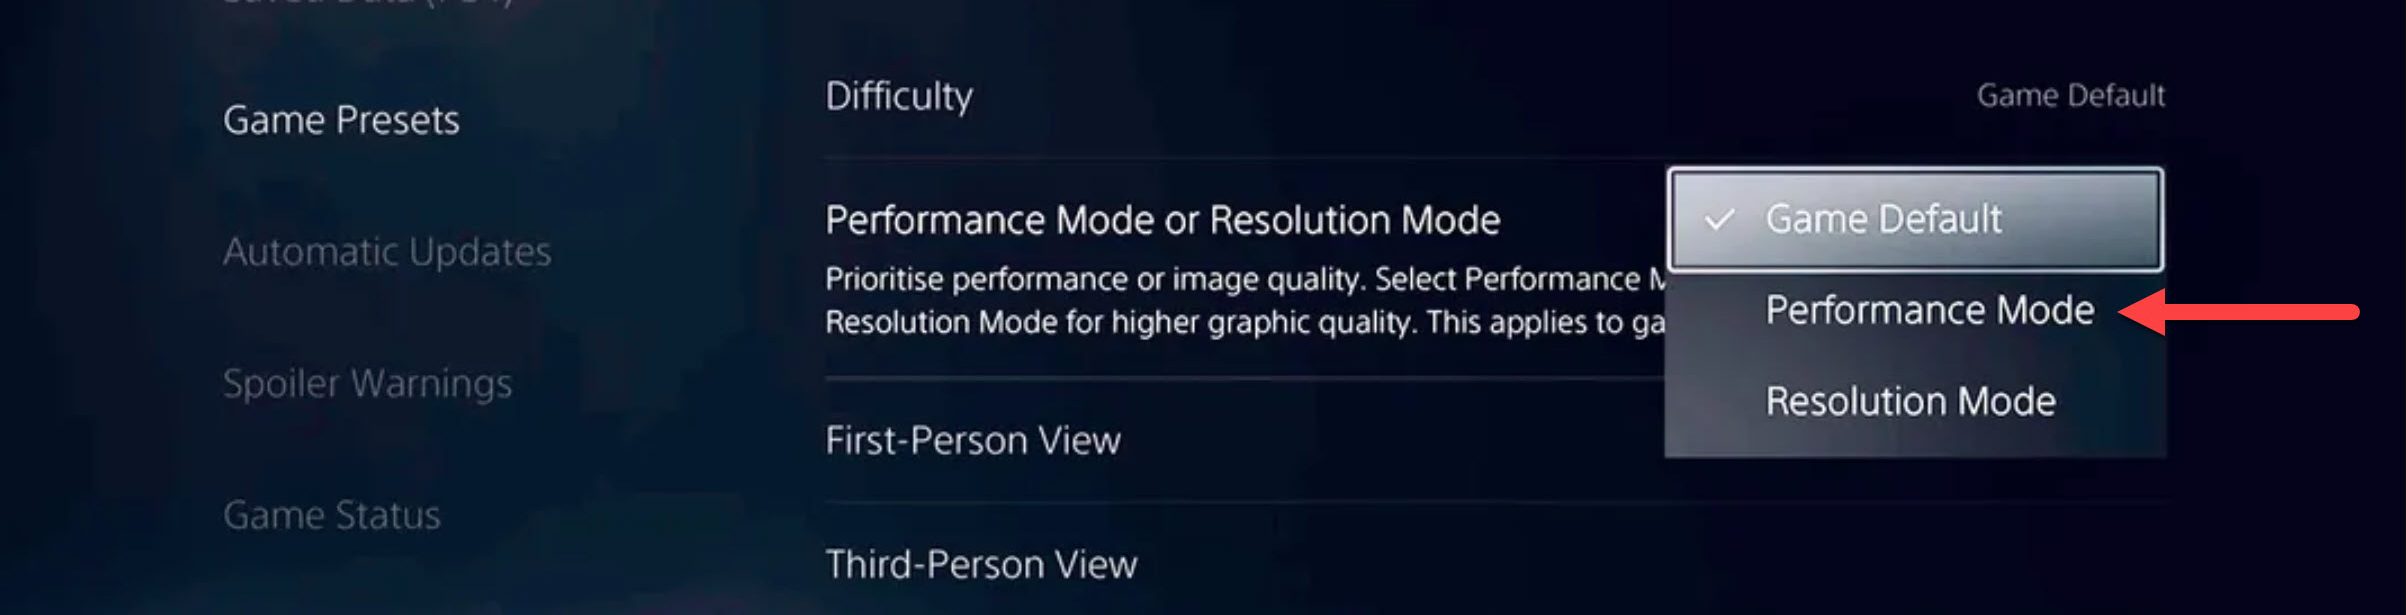 Performance Mode In The PS5